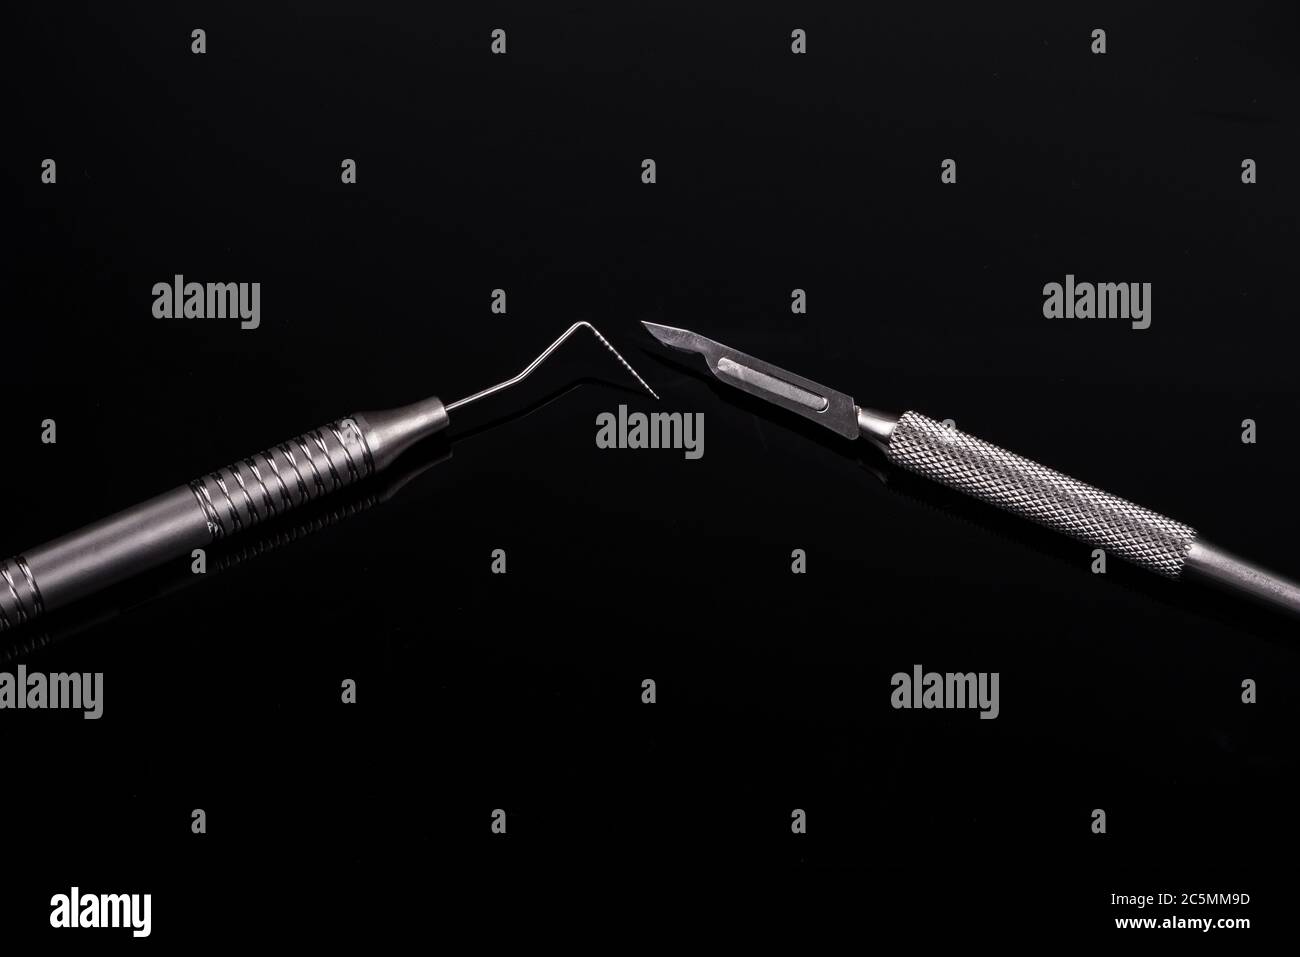 Horizontal color image with a front view of a professional dental tools on a black background. Periodontal probe and scalpel. Stock Photo